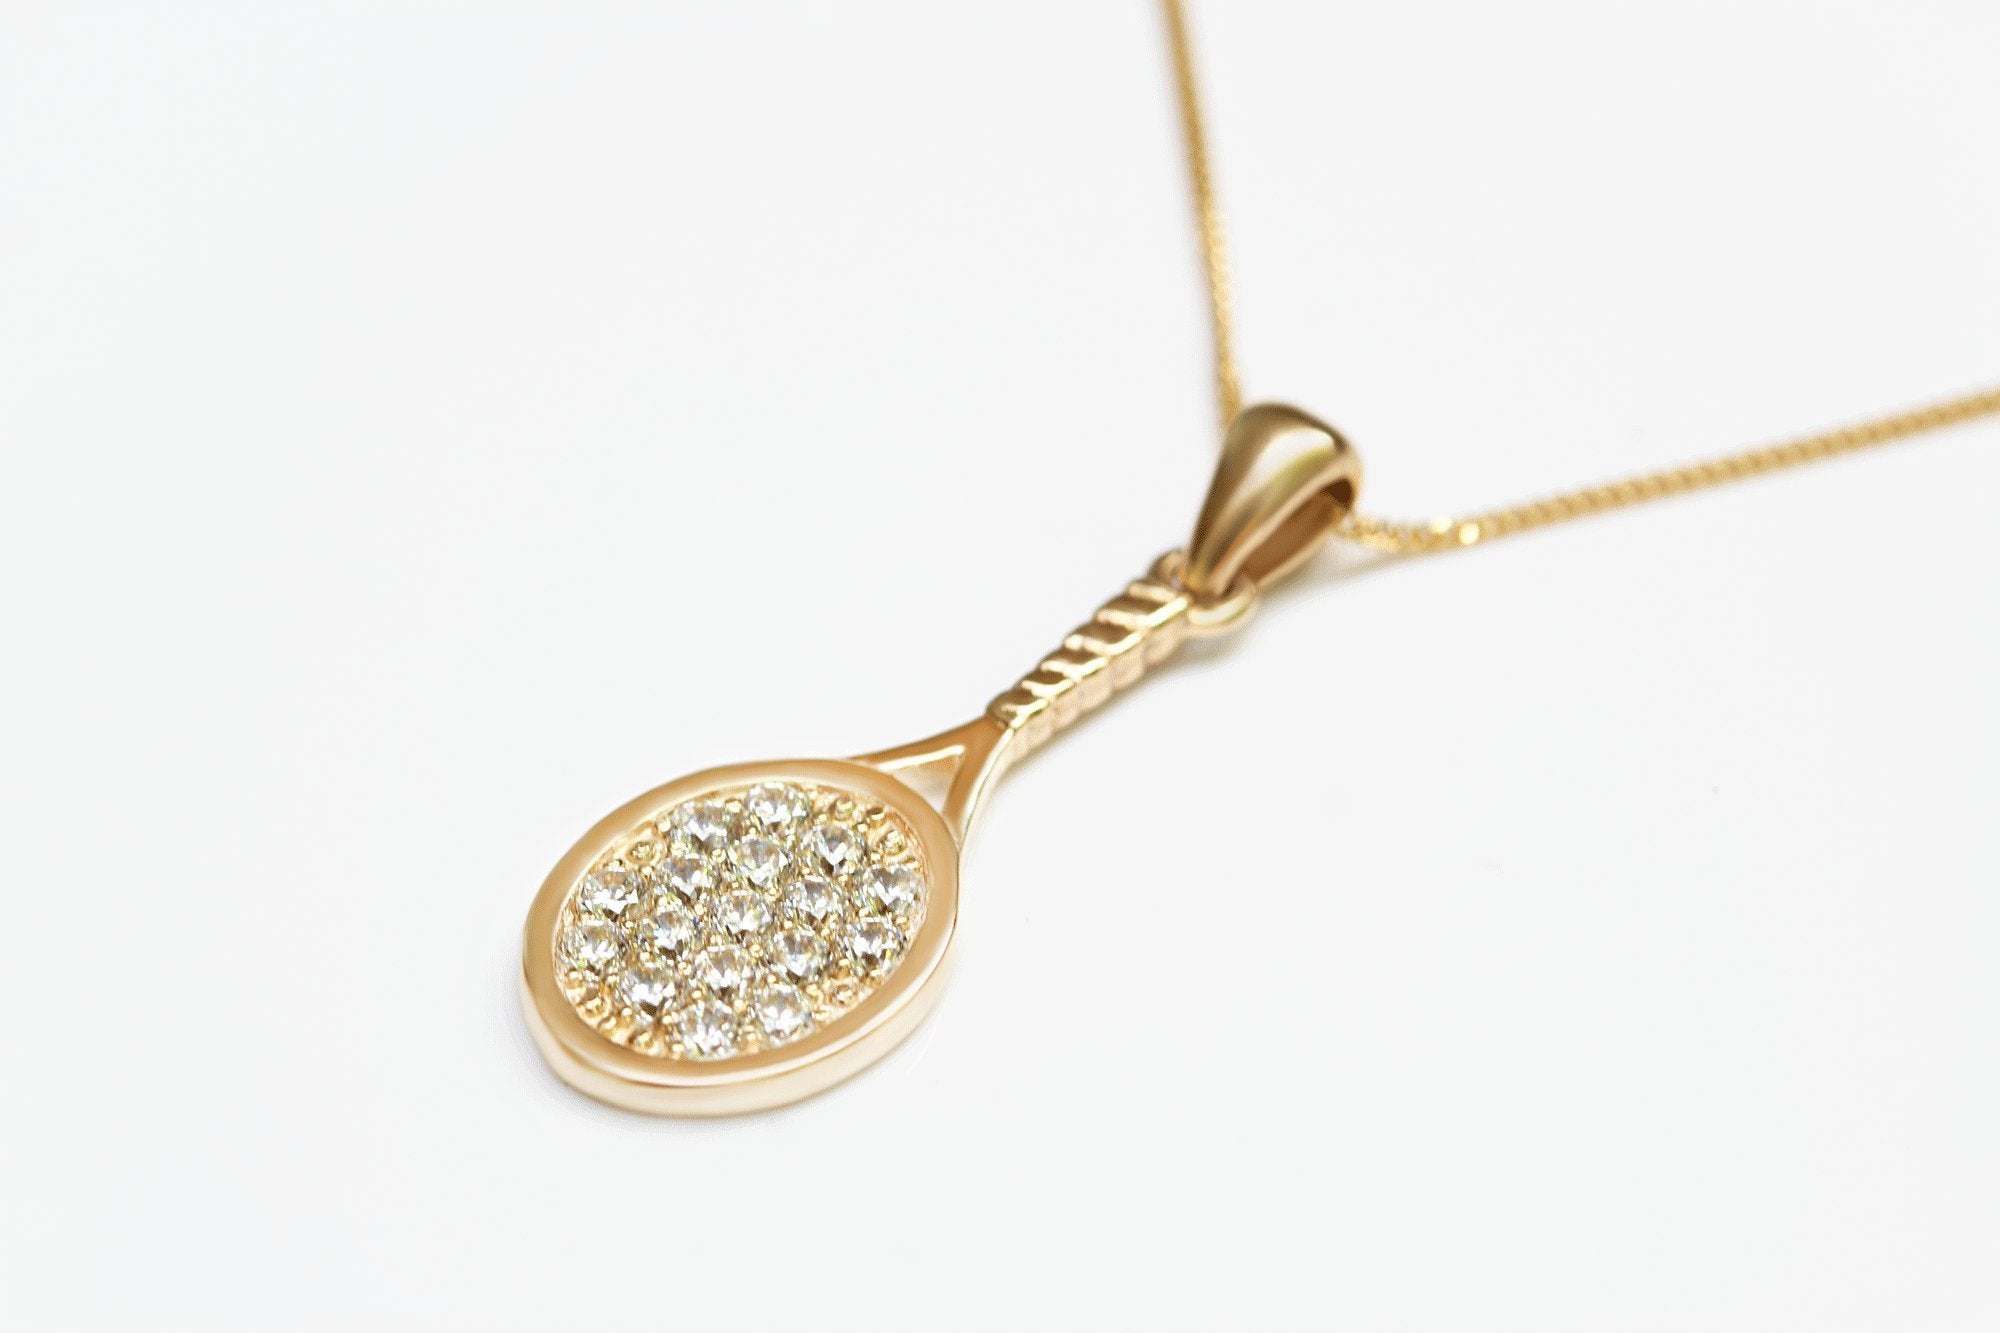 Gold Tennis Racquet Necklace with 23 stones